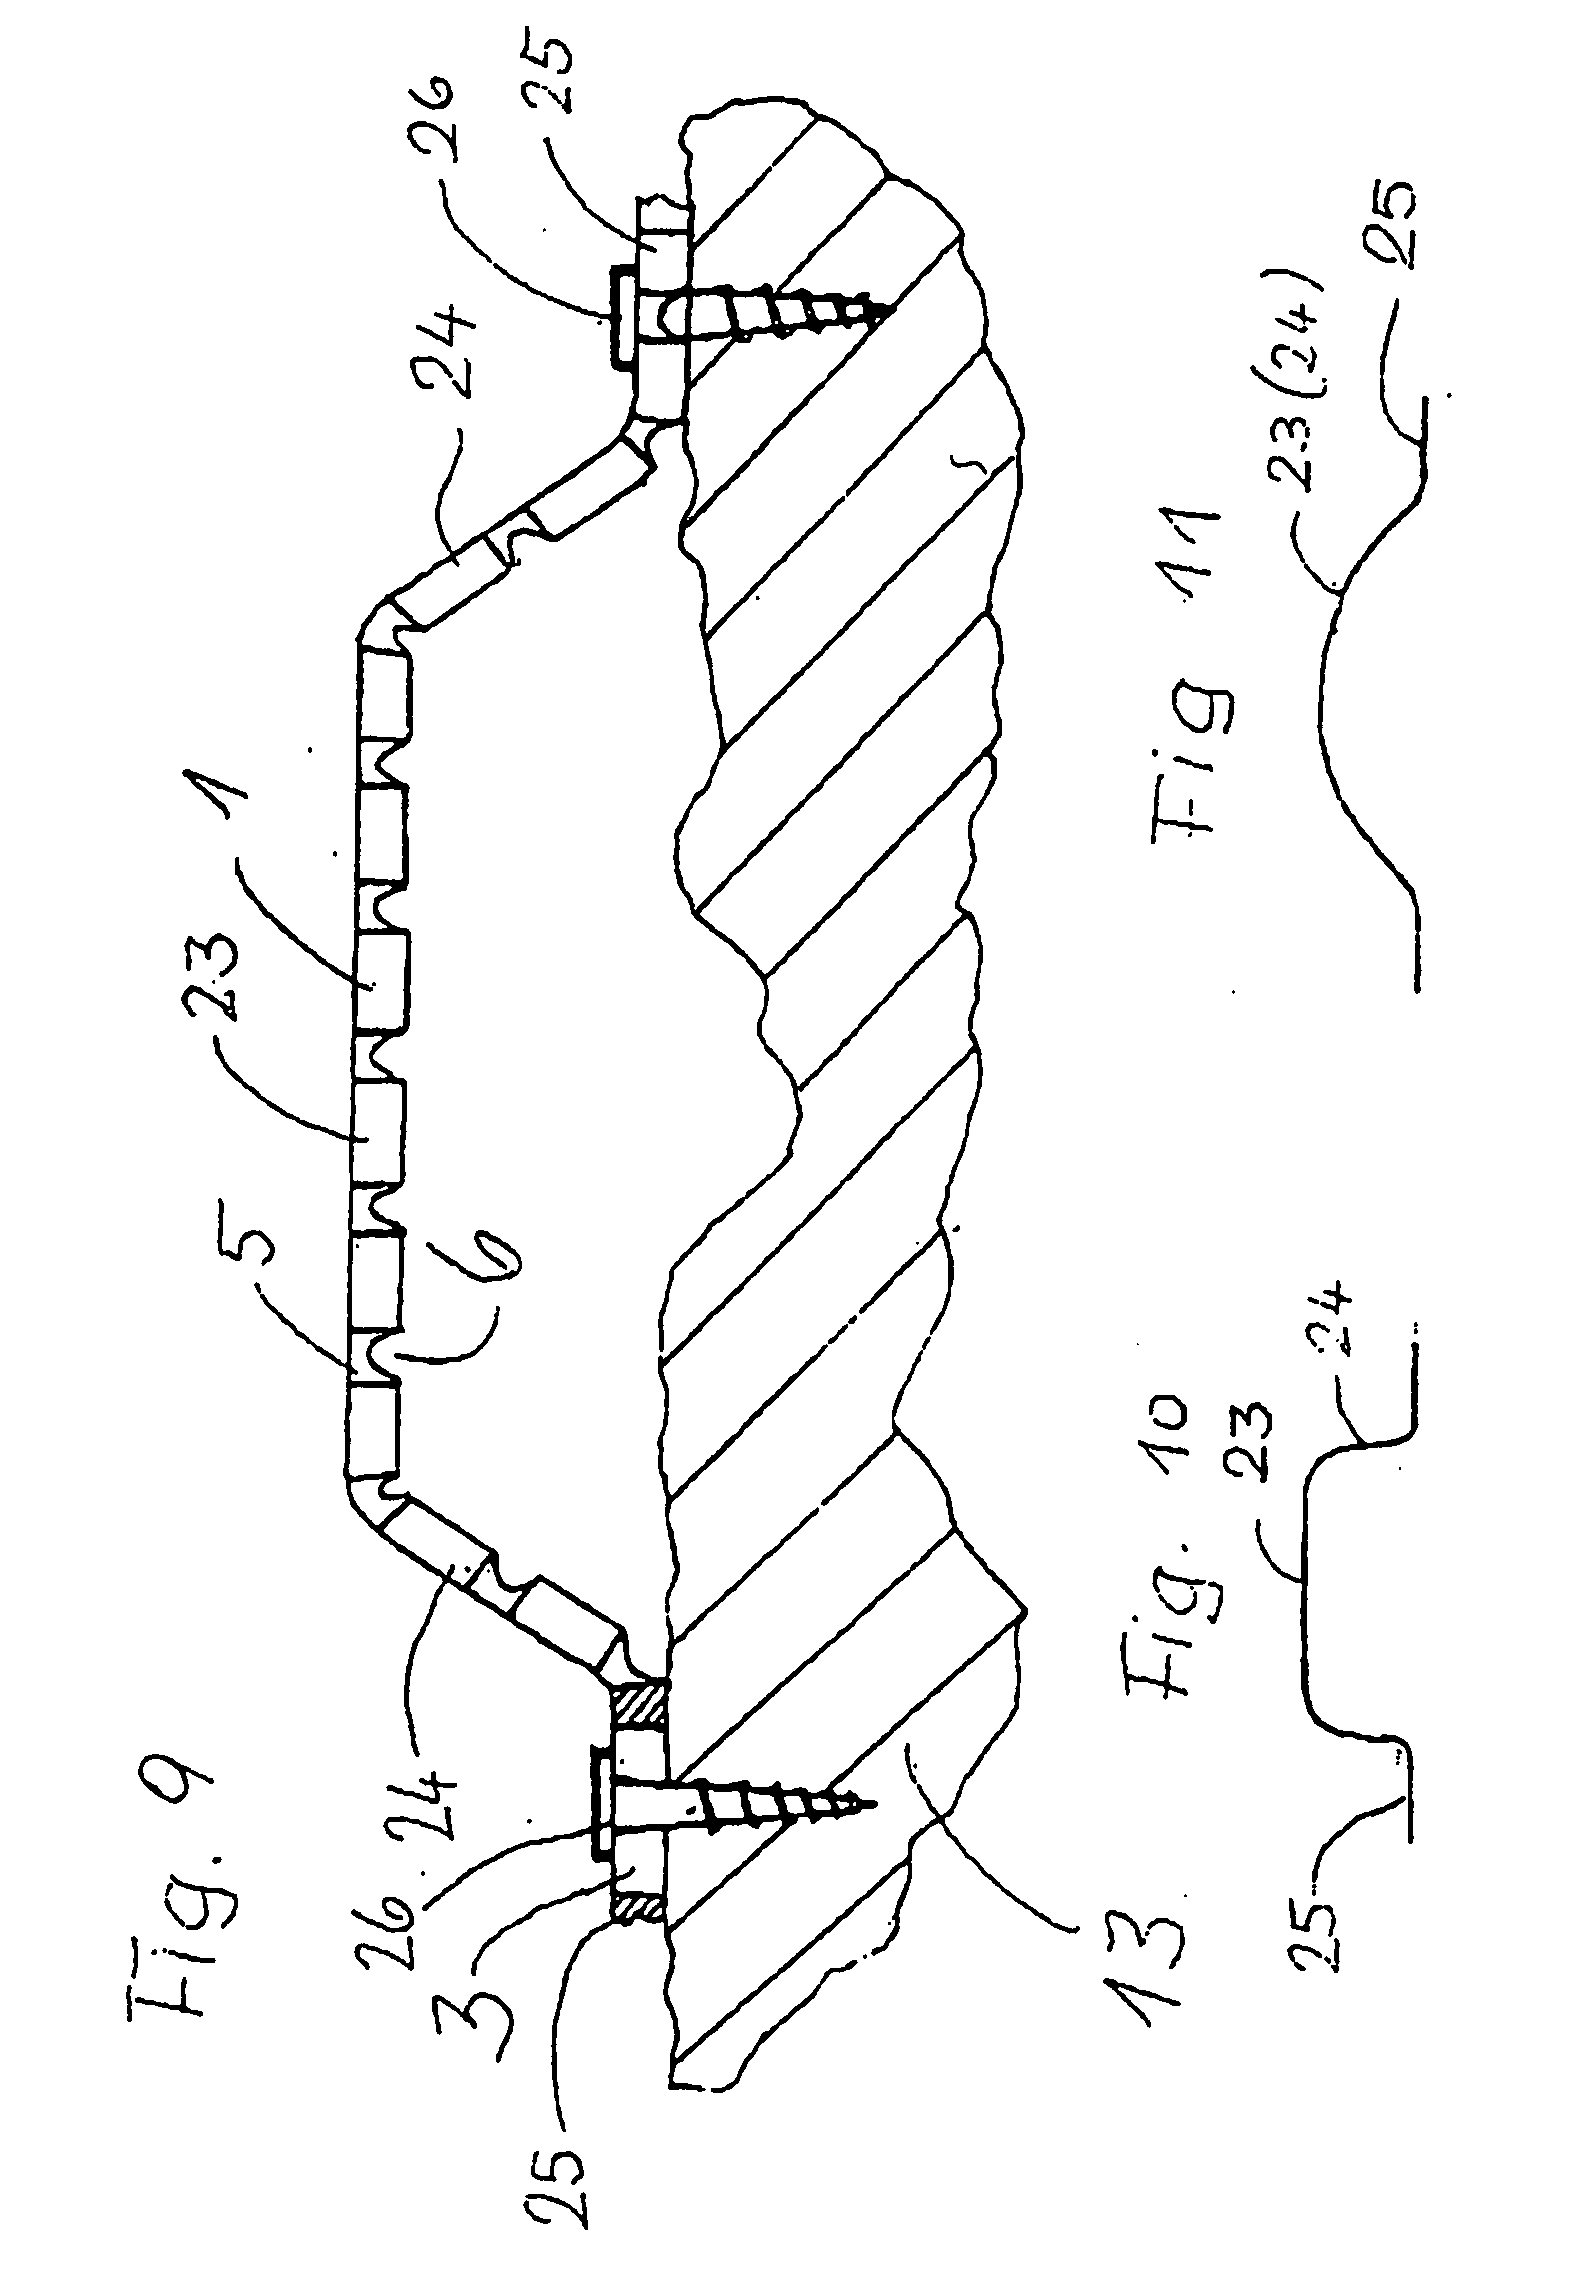 Device for regenerating, repairing, and modeling human and animal bone, especially in the jaw area for dental applications